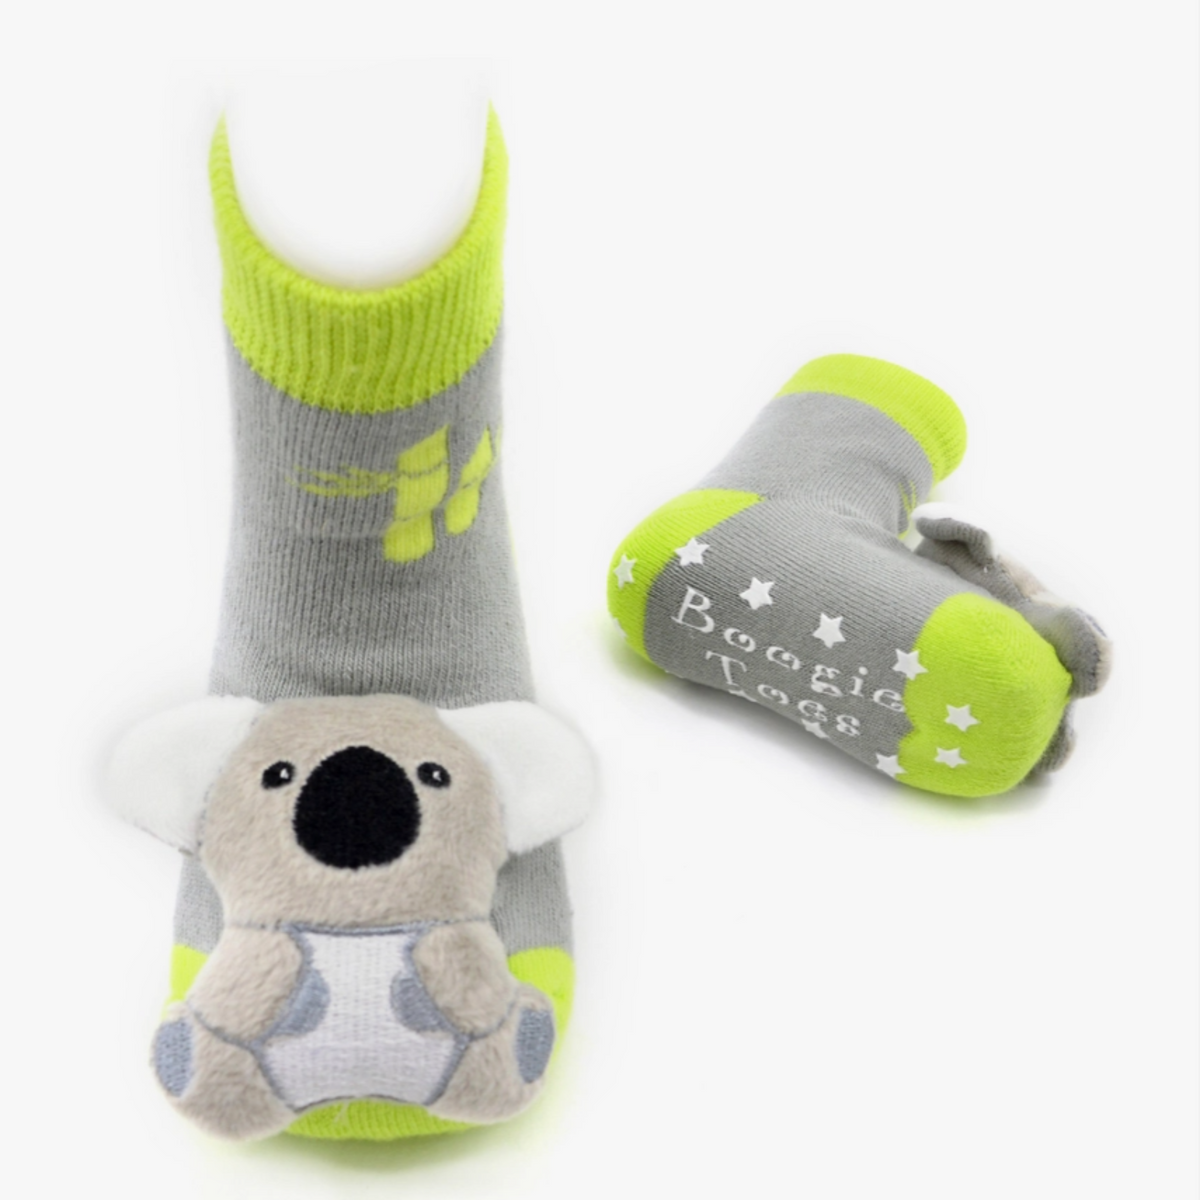 Piero Liventi Boogie Toes rattle baby sock featuring gray sock with green cuff, heel, and toe and gray koala bear on display feet